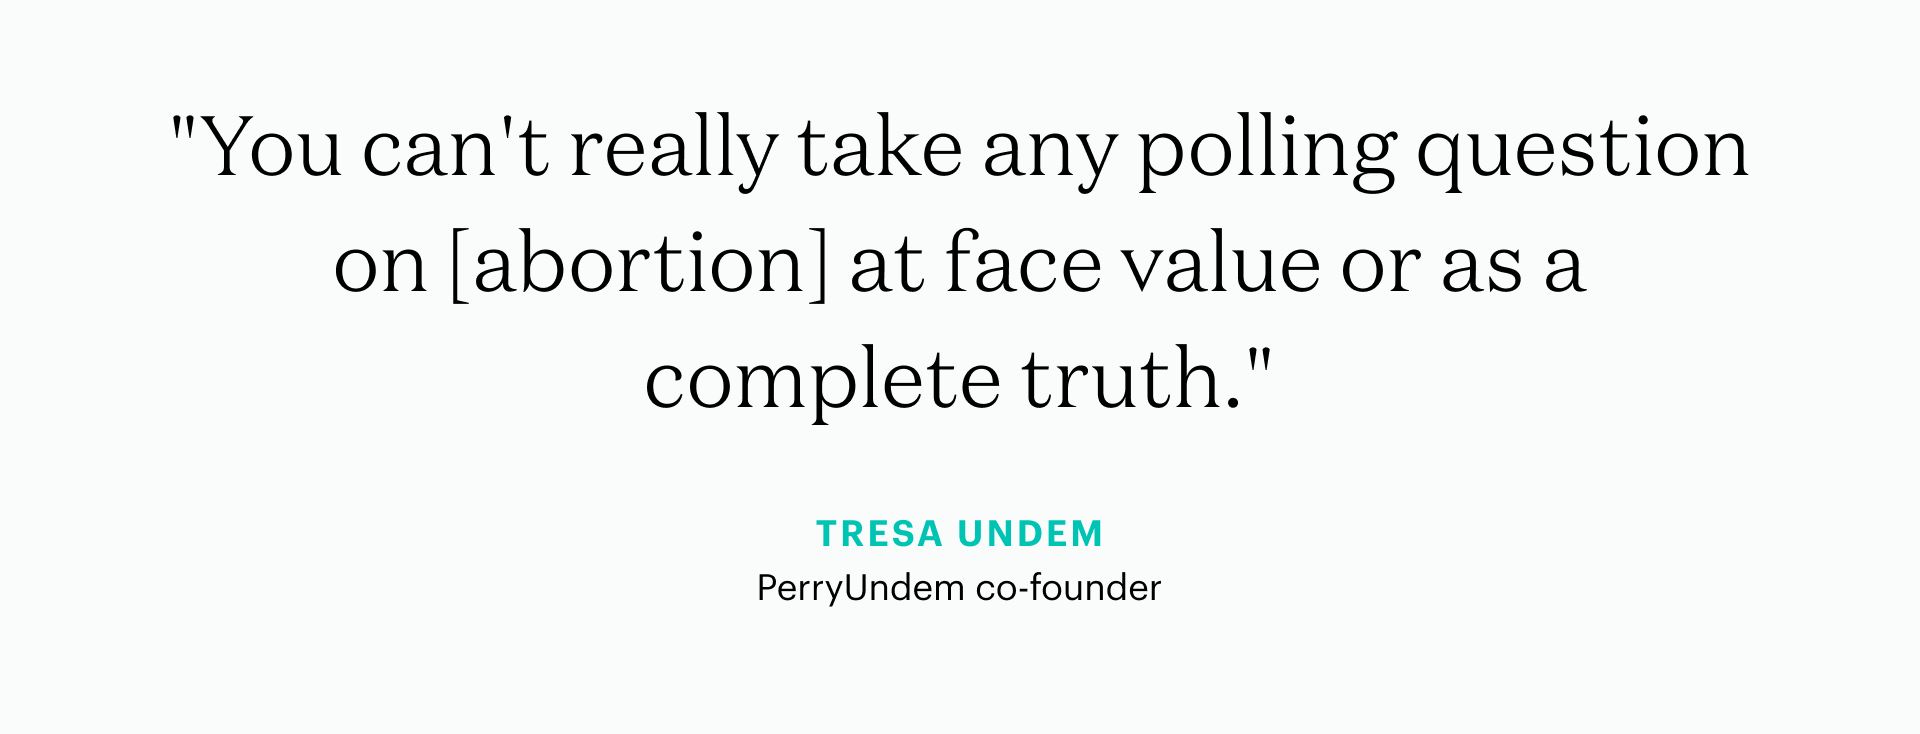 A quote from Tresa Undem